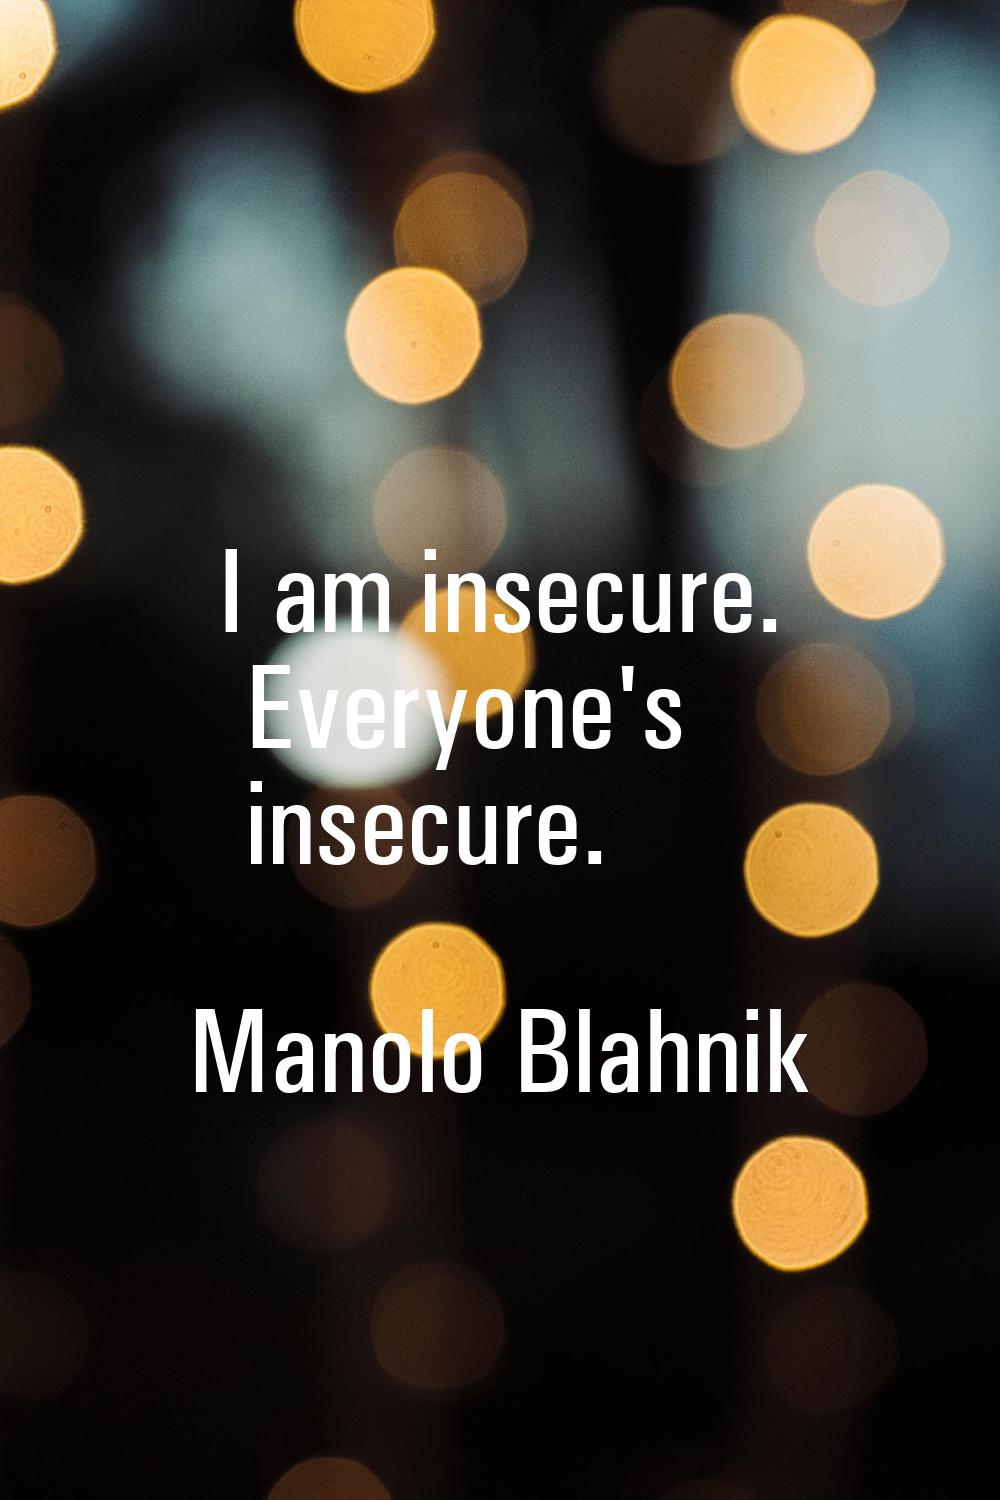 I am insecure. Everyone's insecure.